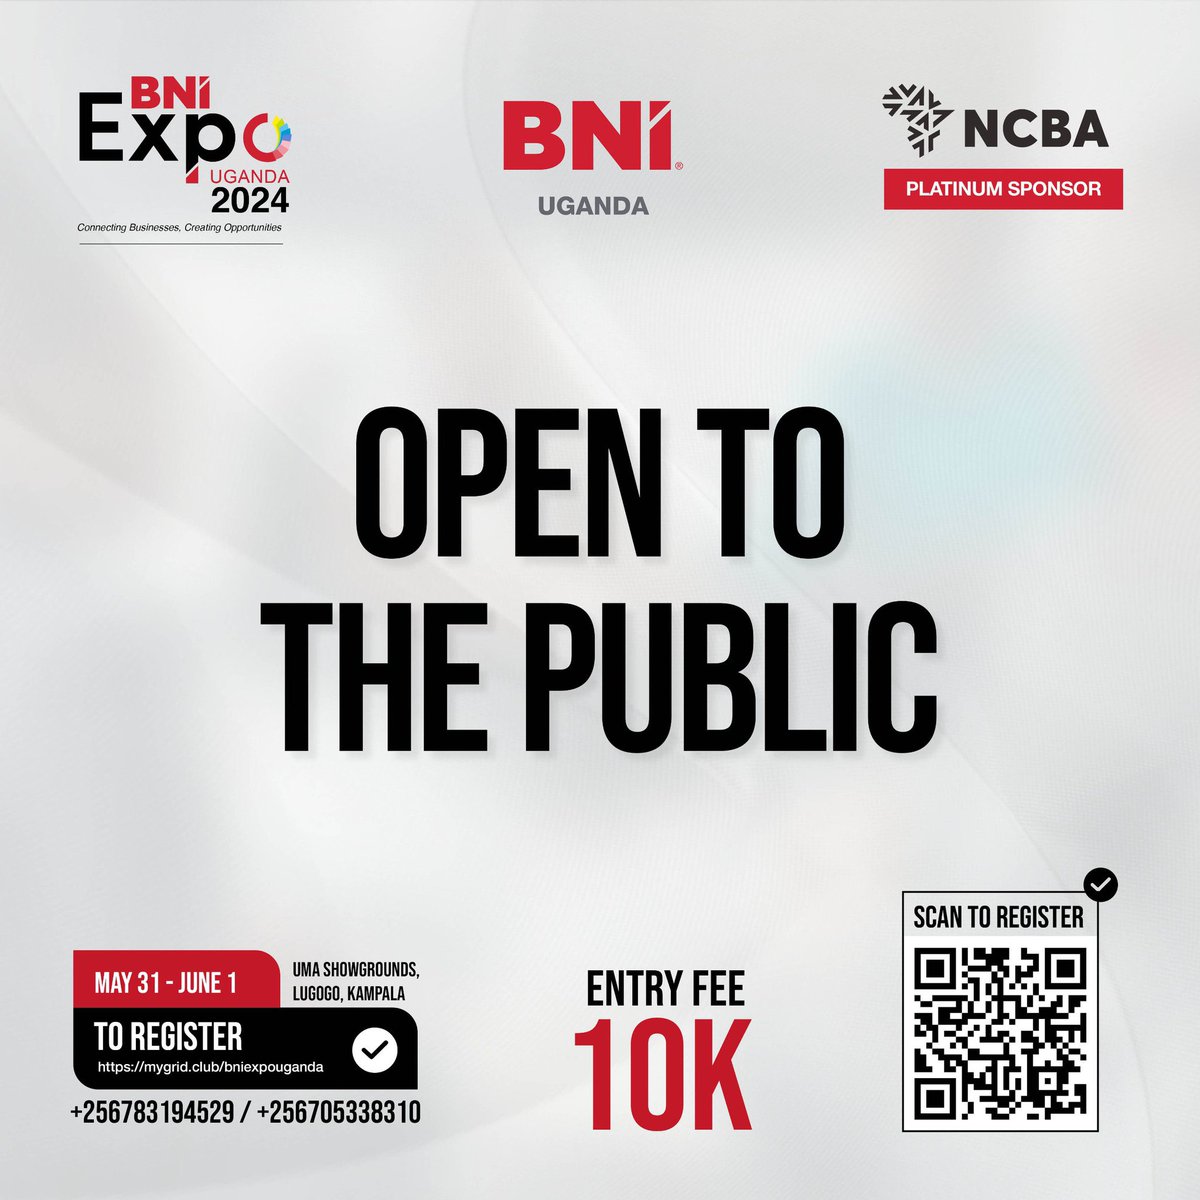 We are happy to be part of the #BNIExpo2024 at UMA Showgrounds, Lugogo. This expo is designed to facilitate business mentorship, dynamic interactions, and extensive networking opportunities. Join us tomorrow at this transformative event & connect with industry leaders.
#goforit